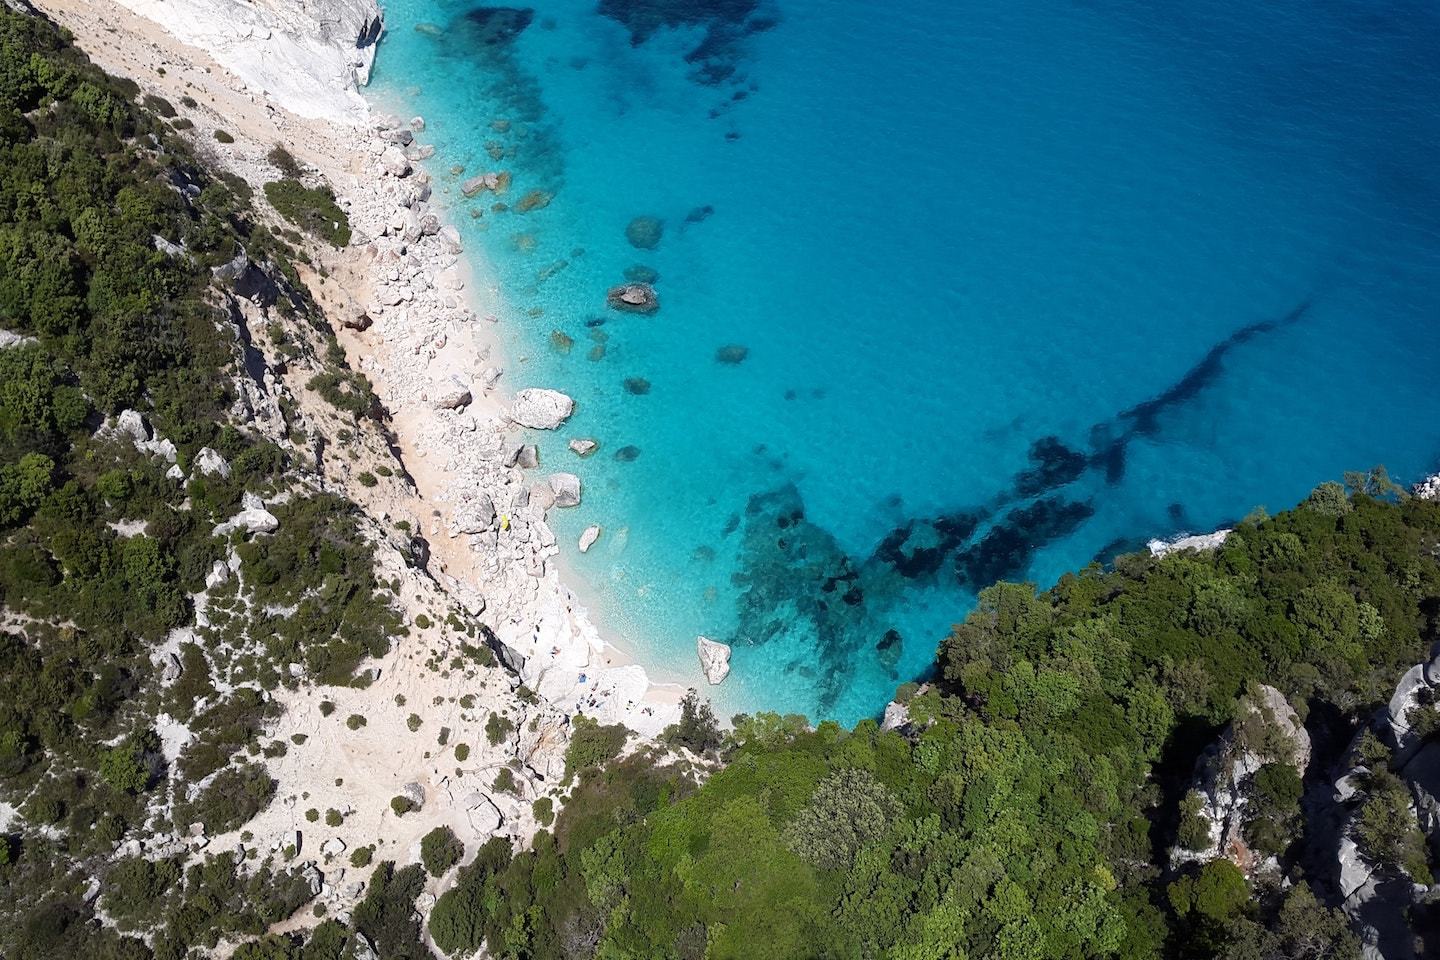 turquoise water with beach and surrounding greenery